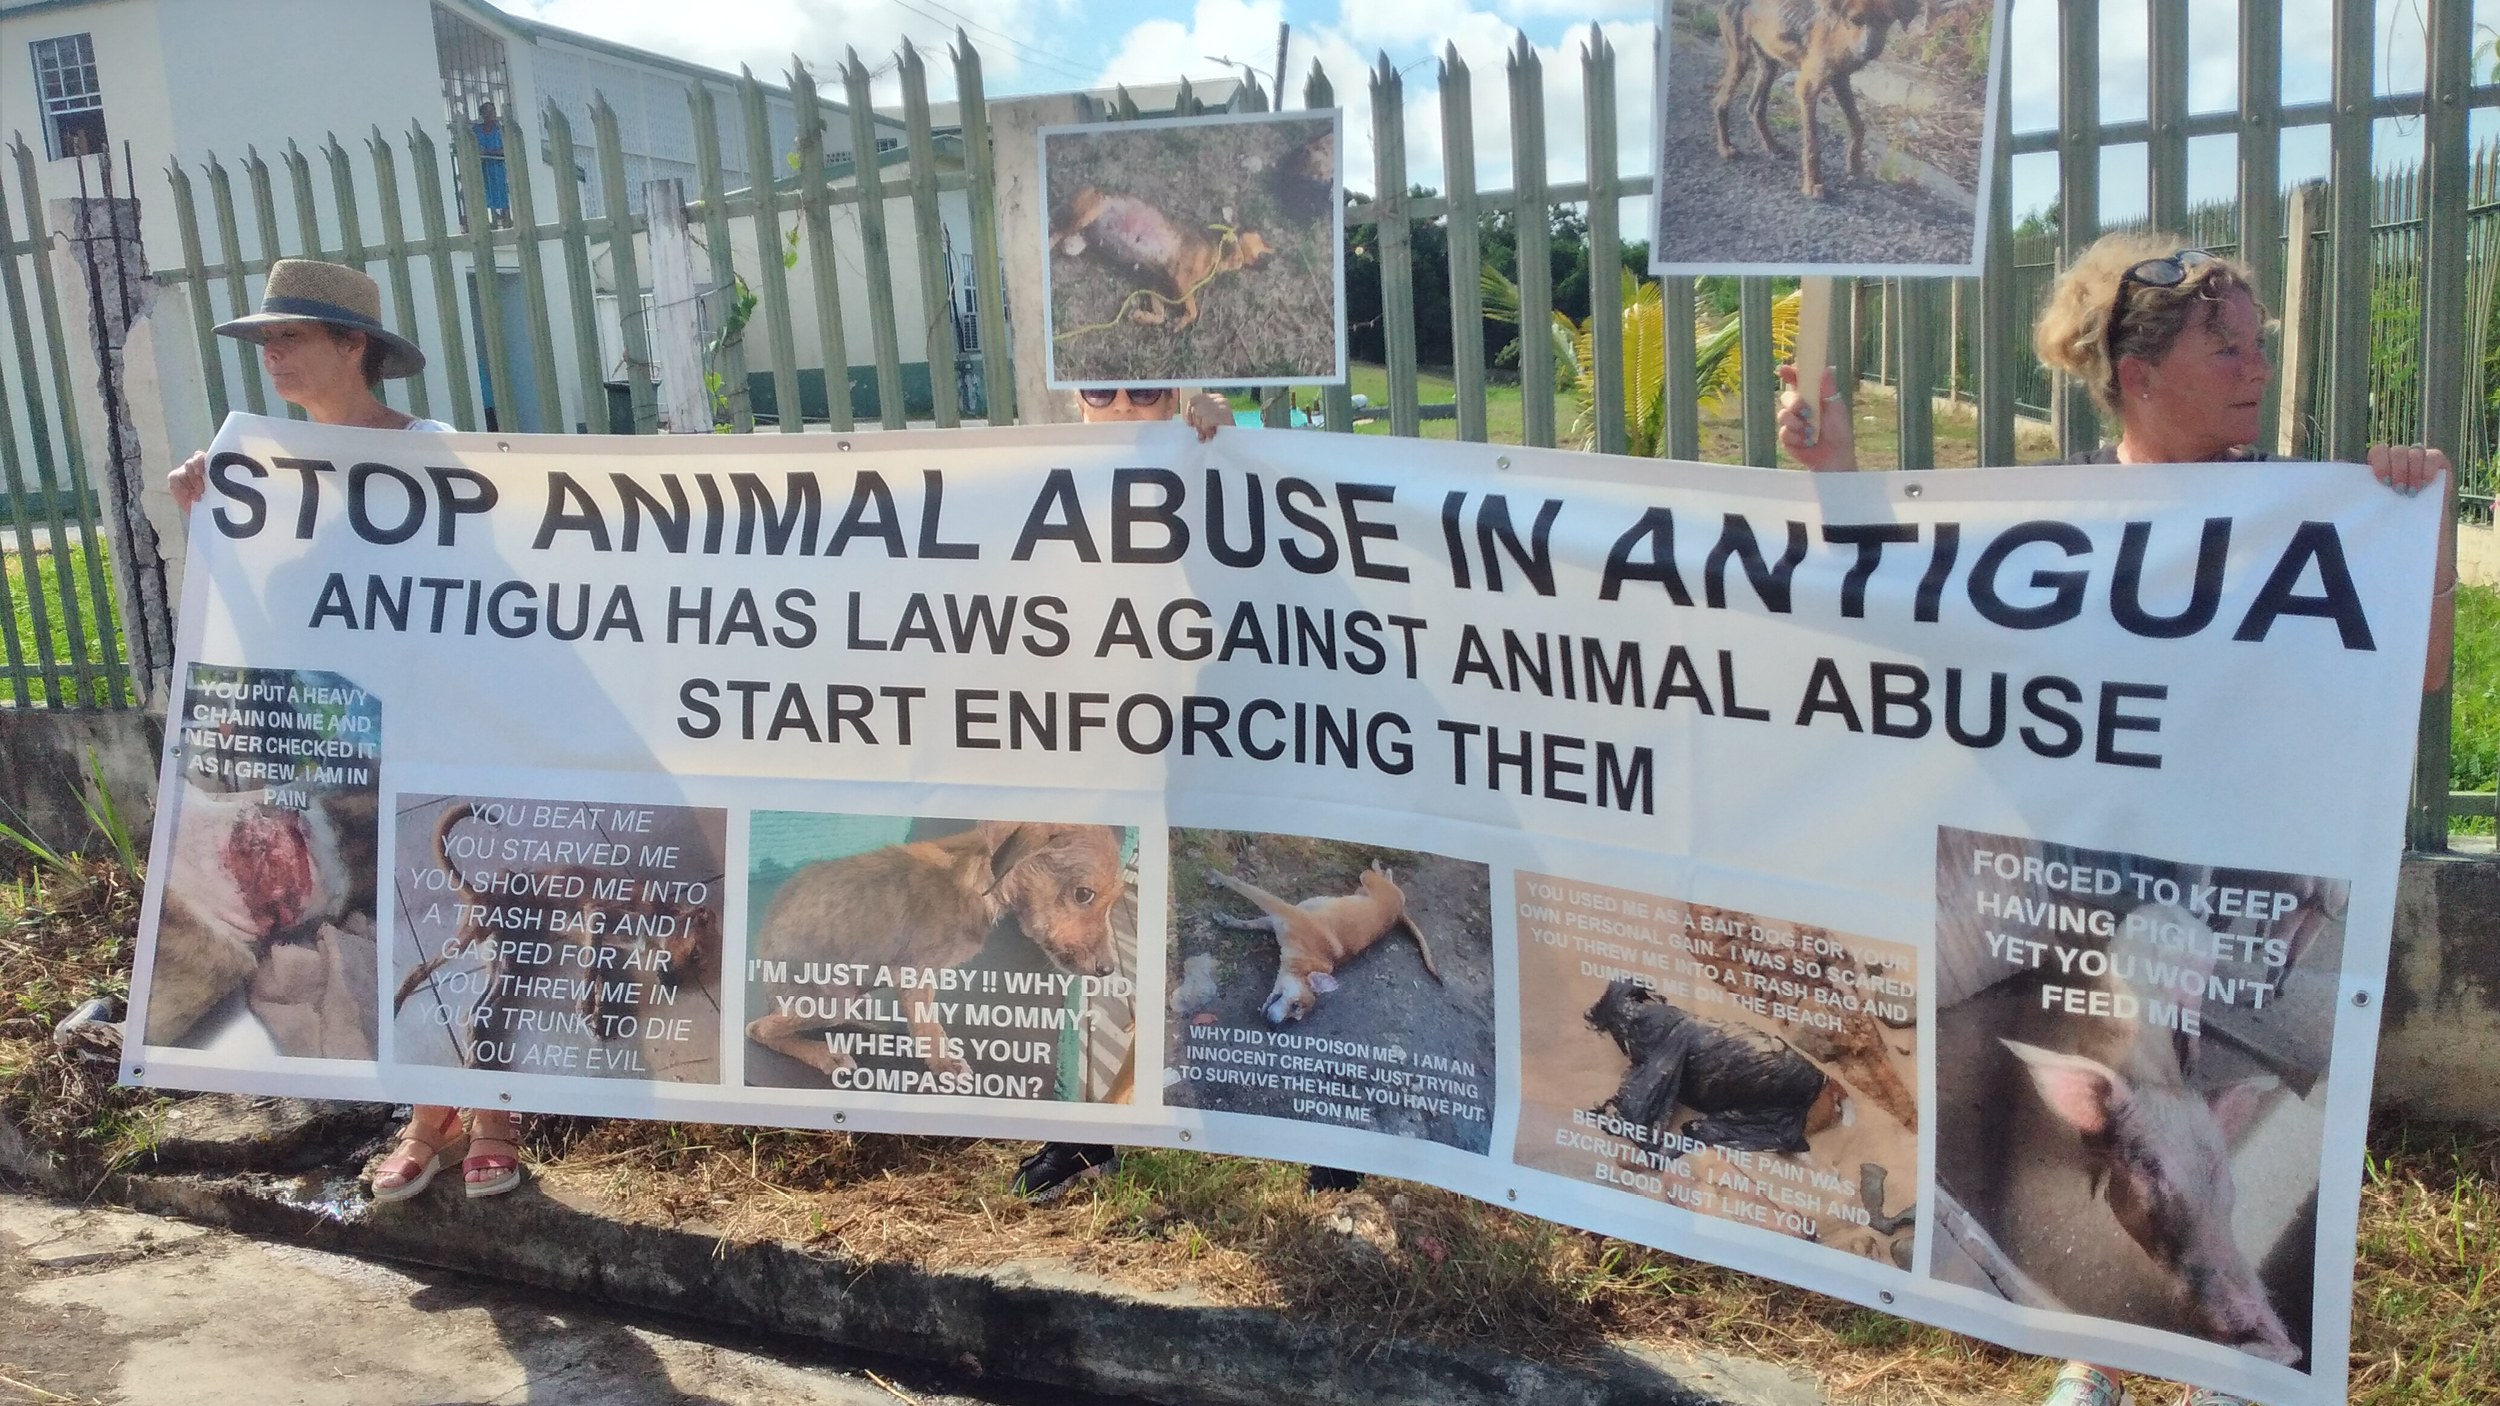 Animal lovers call for end to animal abuse and enforcement of laws -  Antigua Observer Newspaper